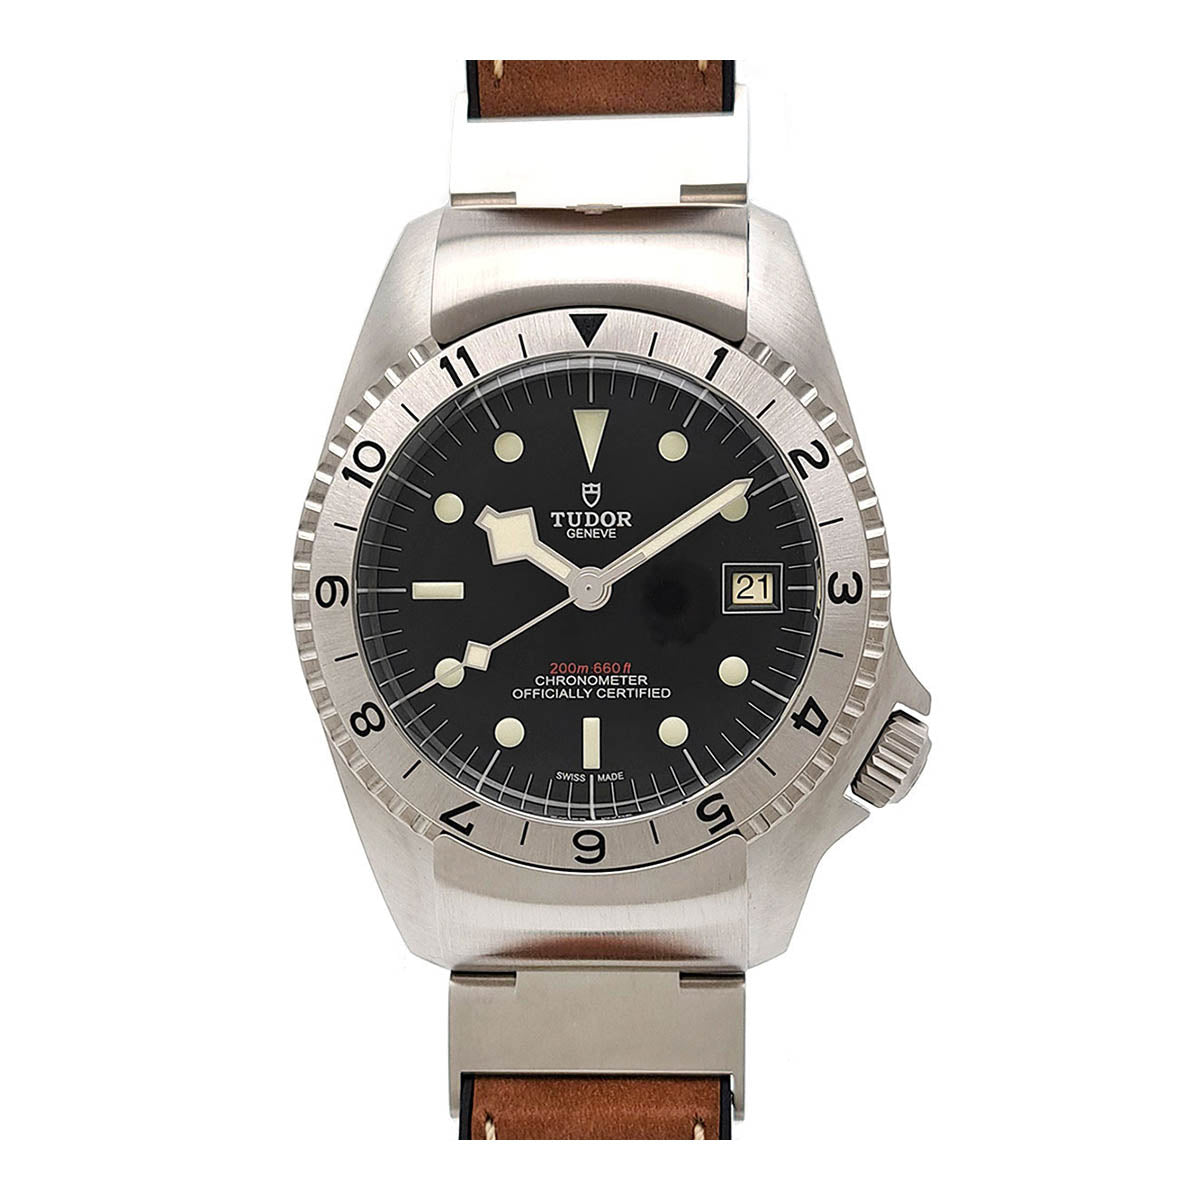 Tudor Black Bay P01 70150 Automatic Stainless Steel Men's Watch  70150.0